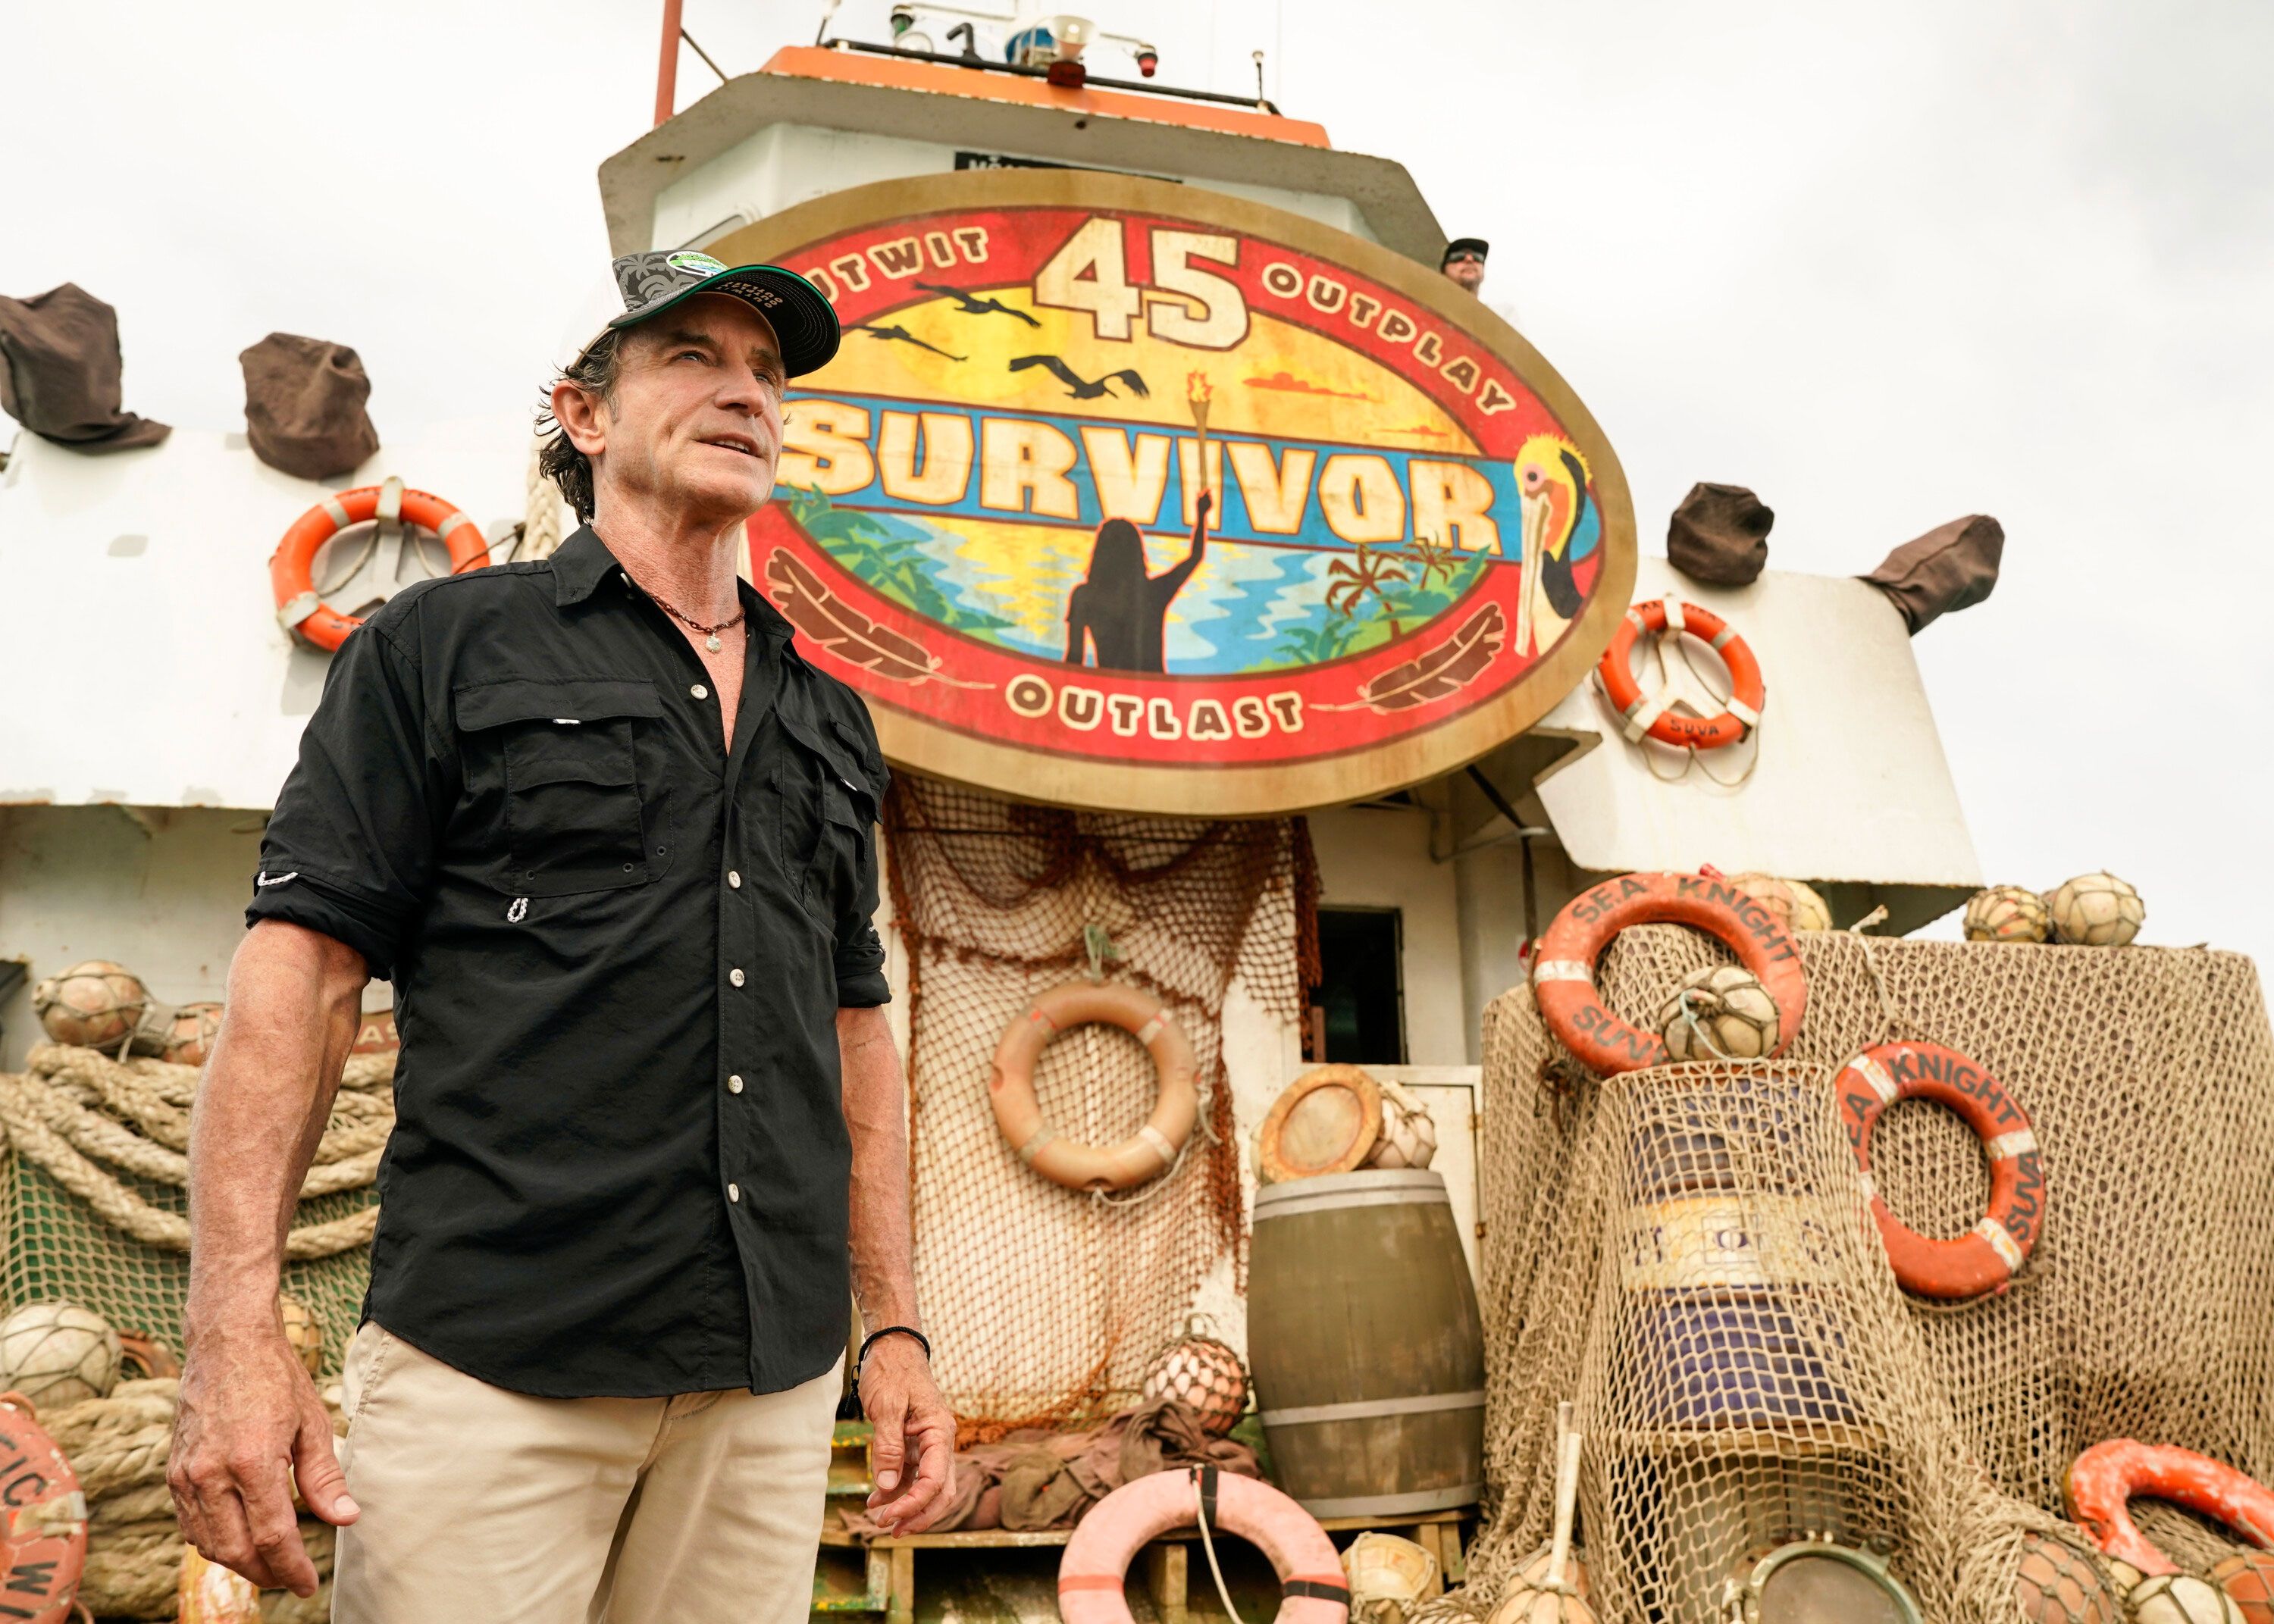 Survivor band members in fight over name